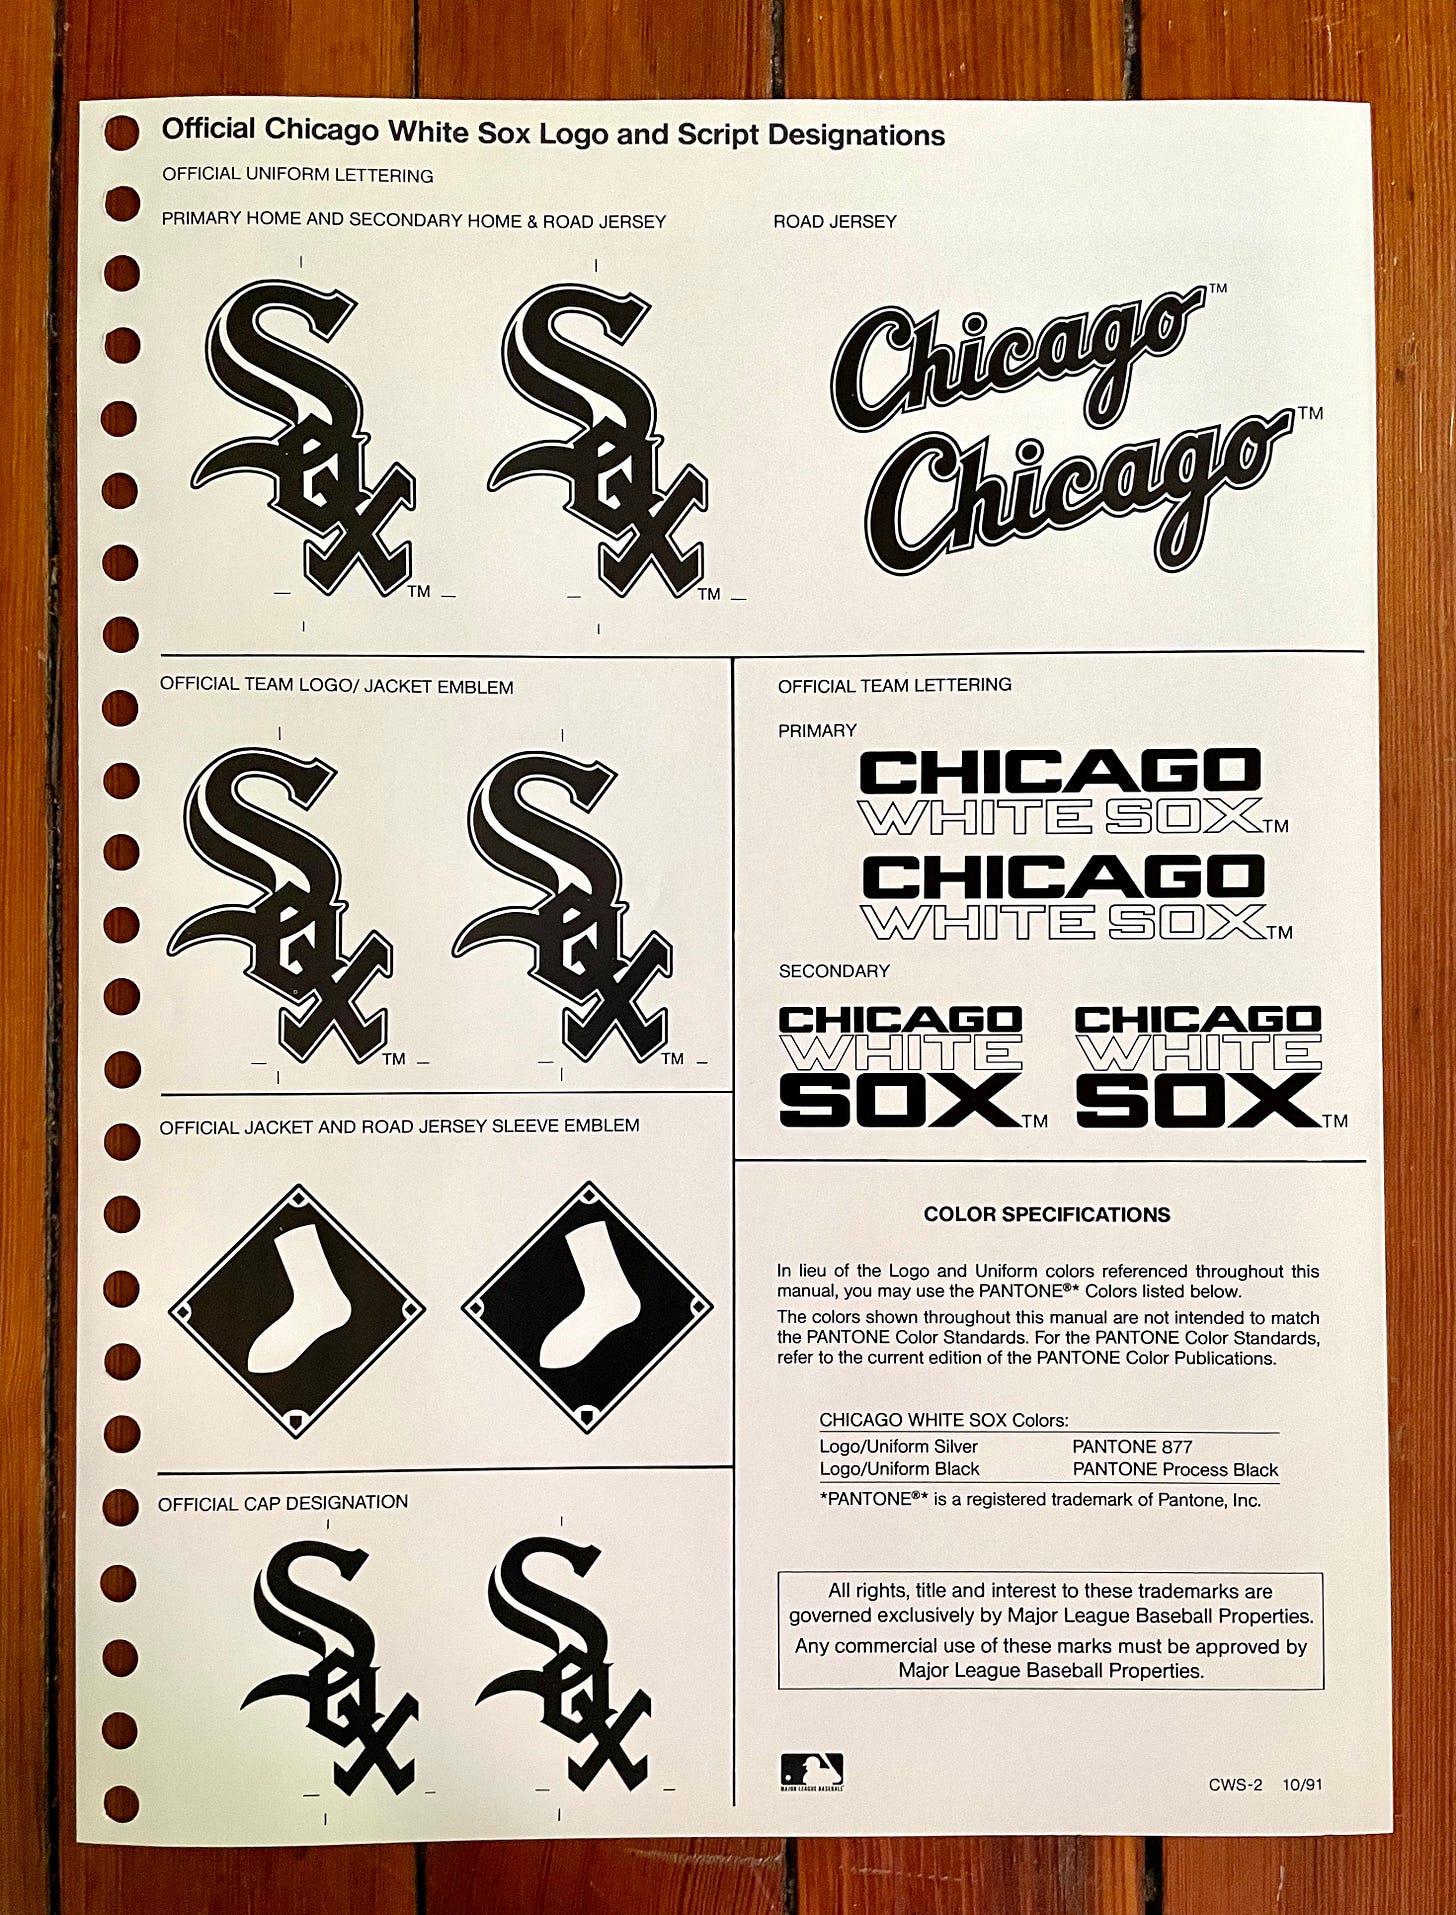 Uni Watch Show and Tell: An Early-'80s MLB Style Guide